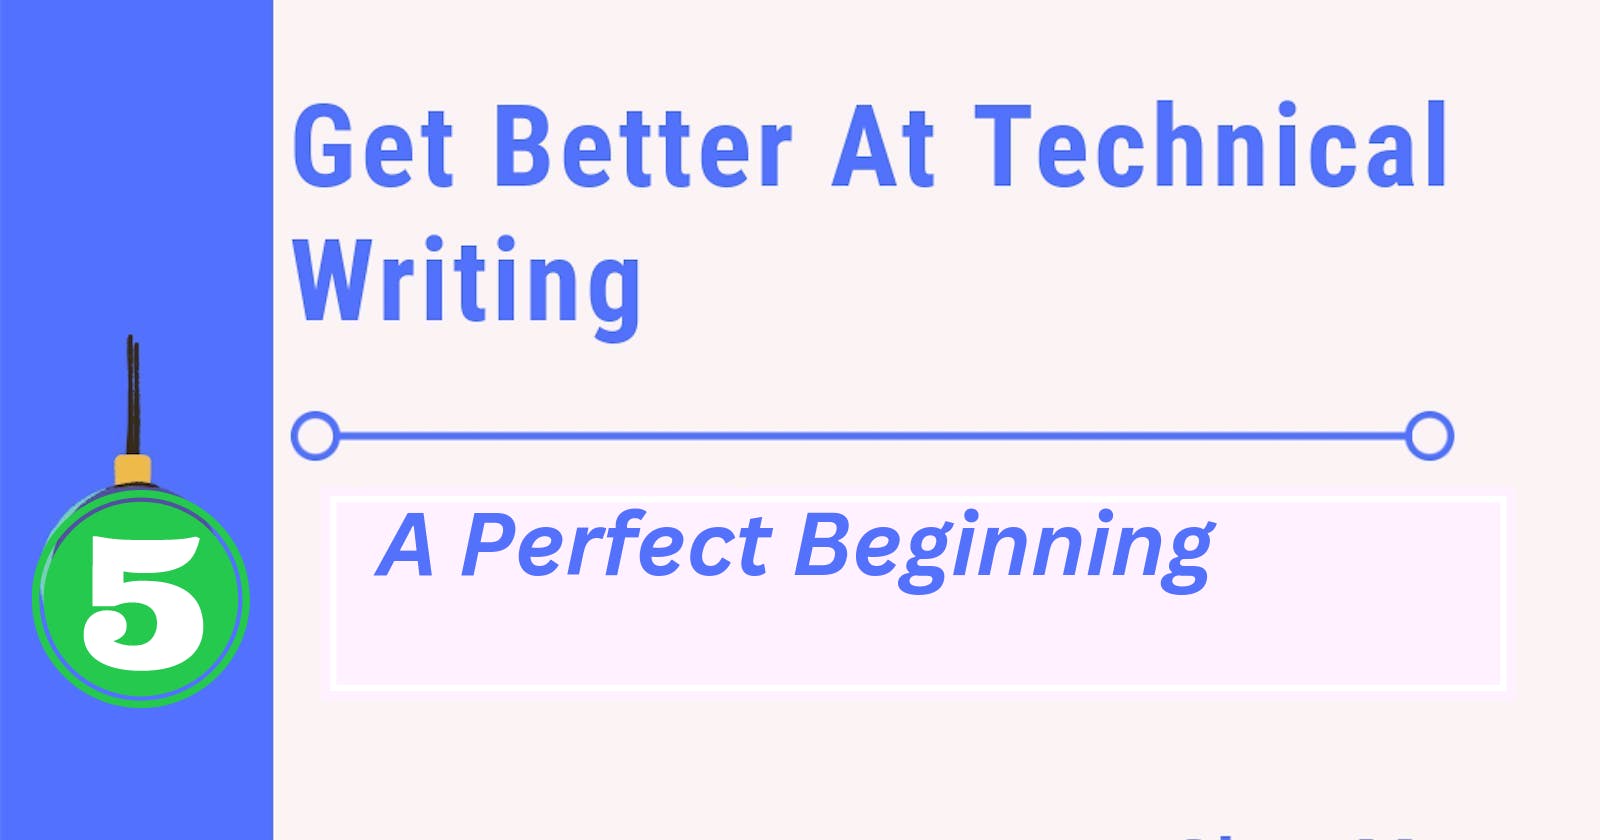 Get Better At Technical Writing 5: A Perfect Beginning